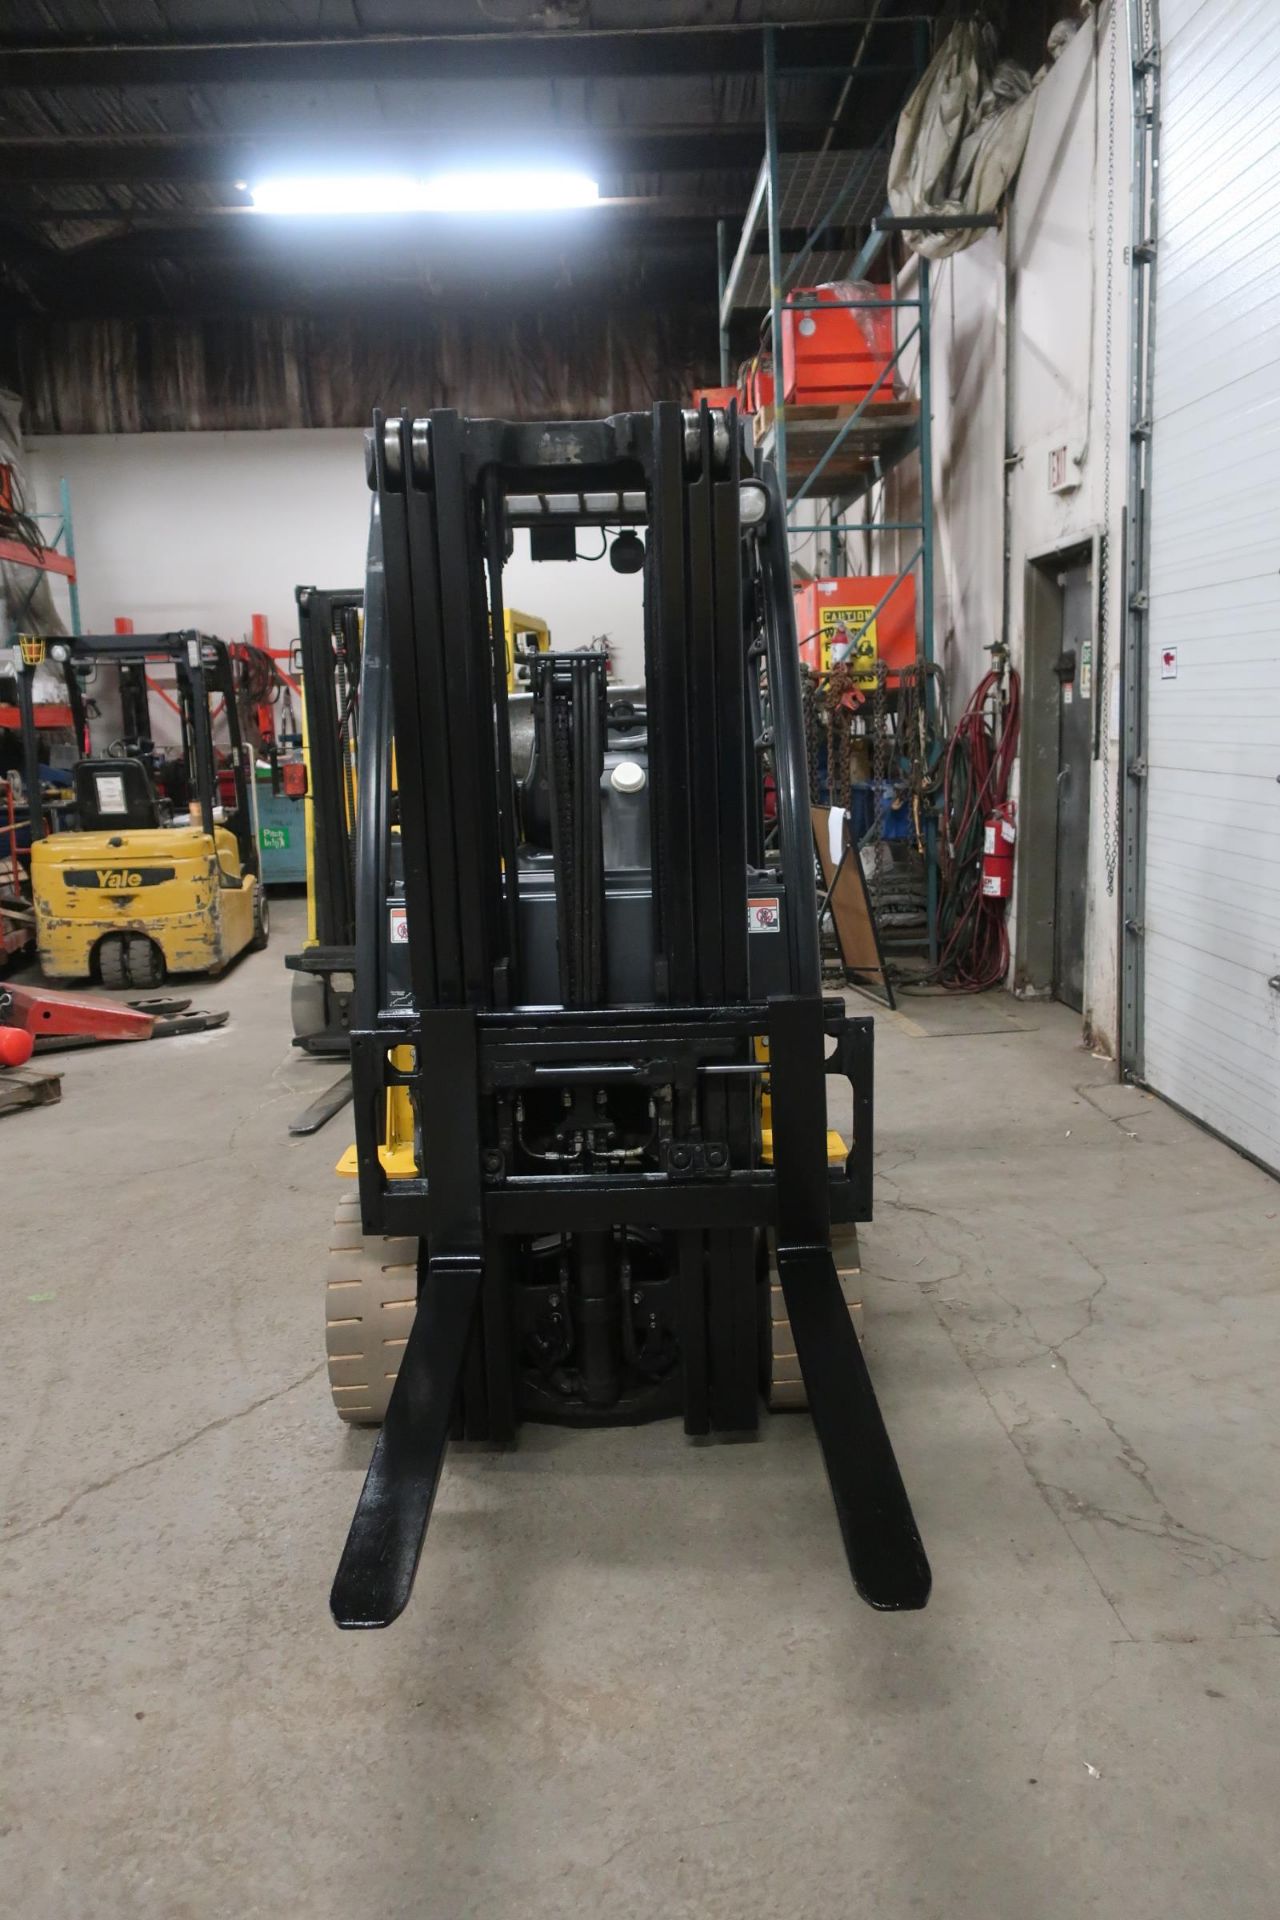 FREE CUSTOMS - 2015 Yale 5000lbs capacity LPG (propane) Forklift with 3-stage mast and sideshift (no - Image 2 of 2